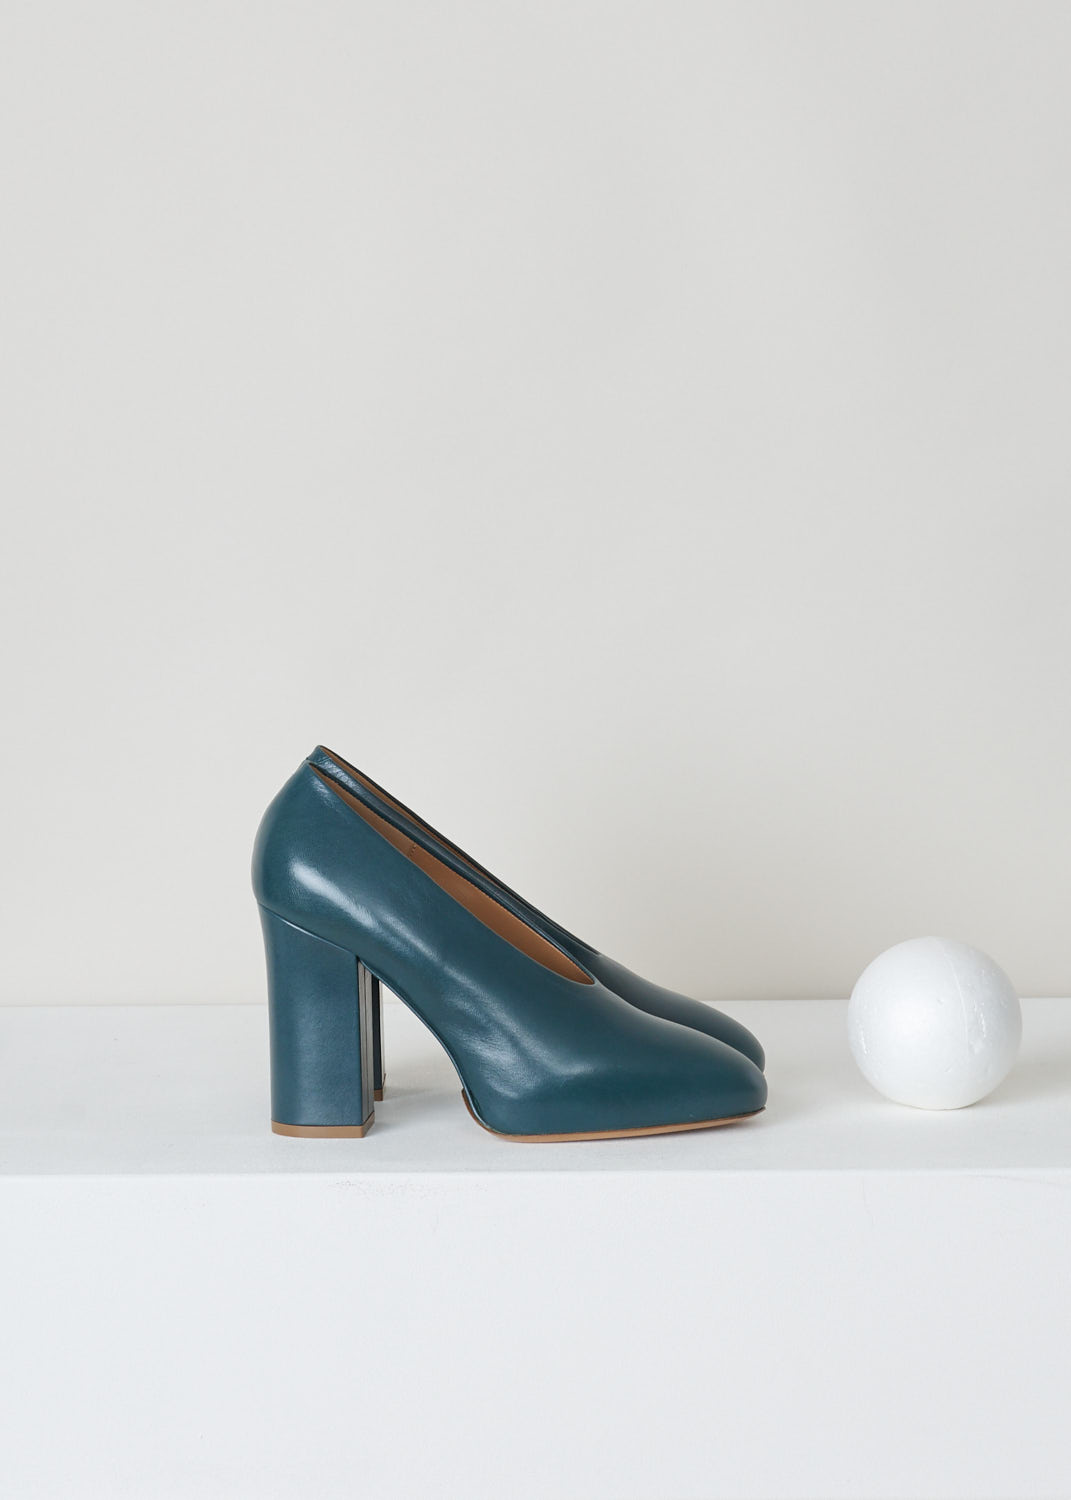 Dries van Noten, Dark aqua color platform pumps, WS26_765_H80_QU303_aqua500, blue, side, Crafted from leather colored in a dark aqua tint. featuring a platform to raise the height of the pump. Comes with a round toe section. 

Heel height: 10 cm / 3.9 inch. 